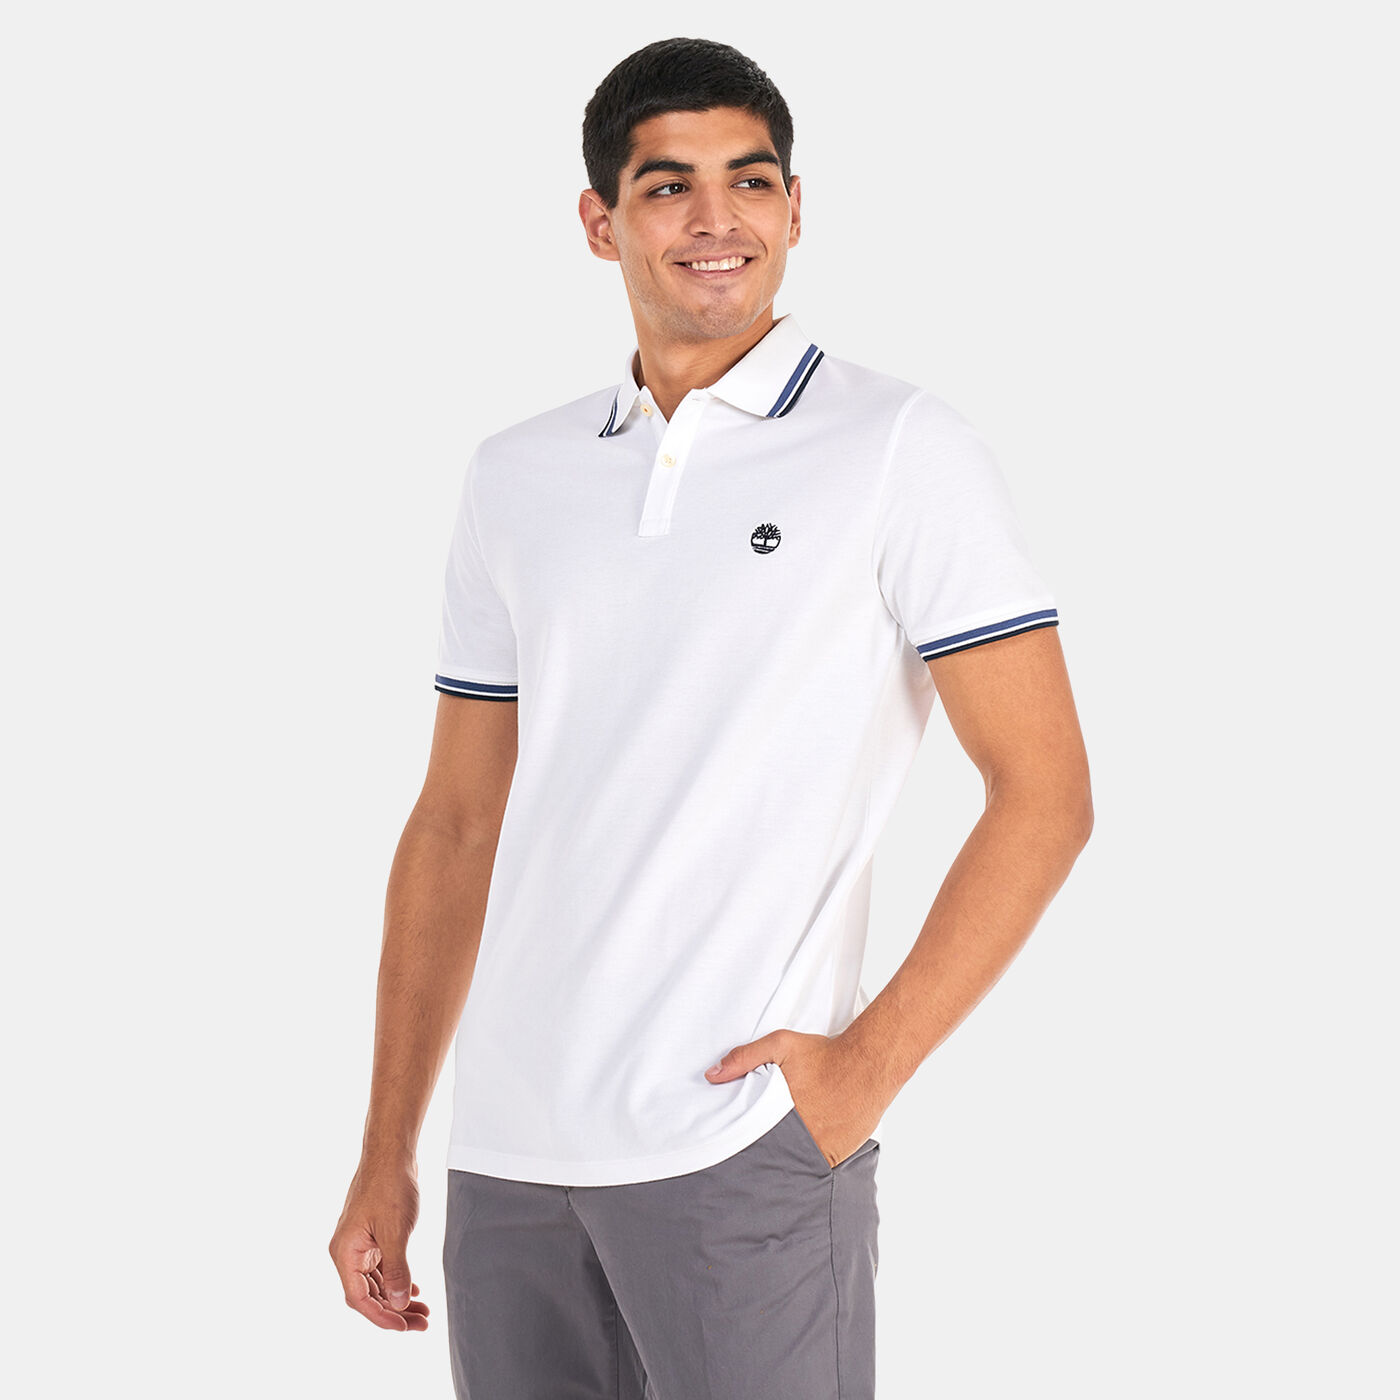 Men's Millers River Tipped Polo Shirt